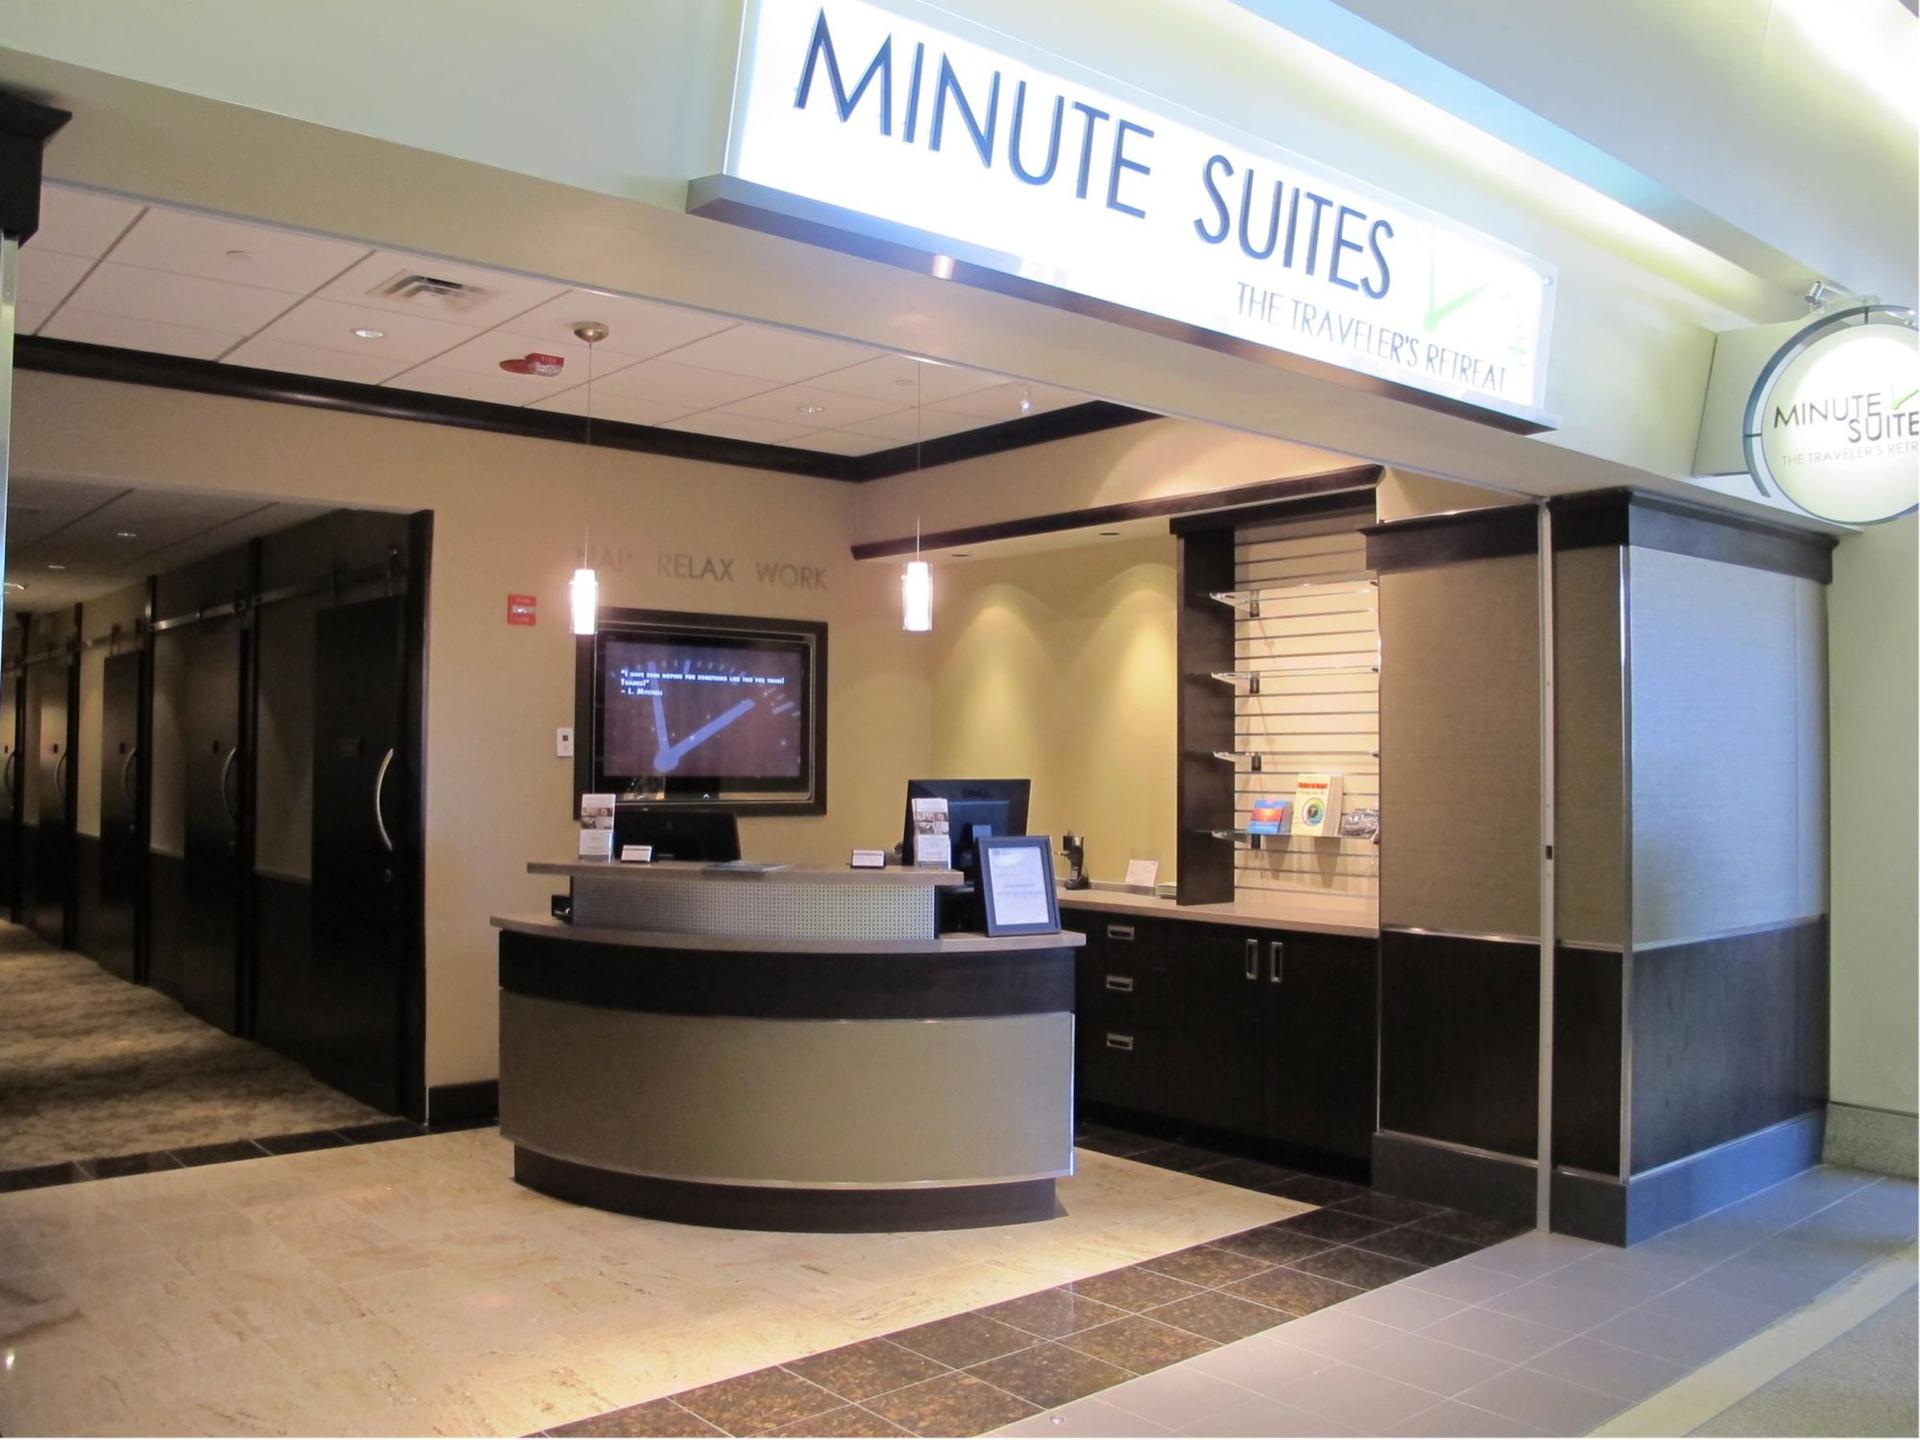 Minute Suites image 11 of 41